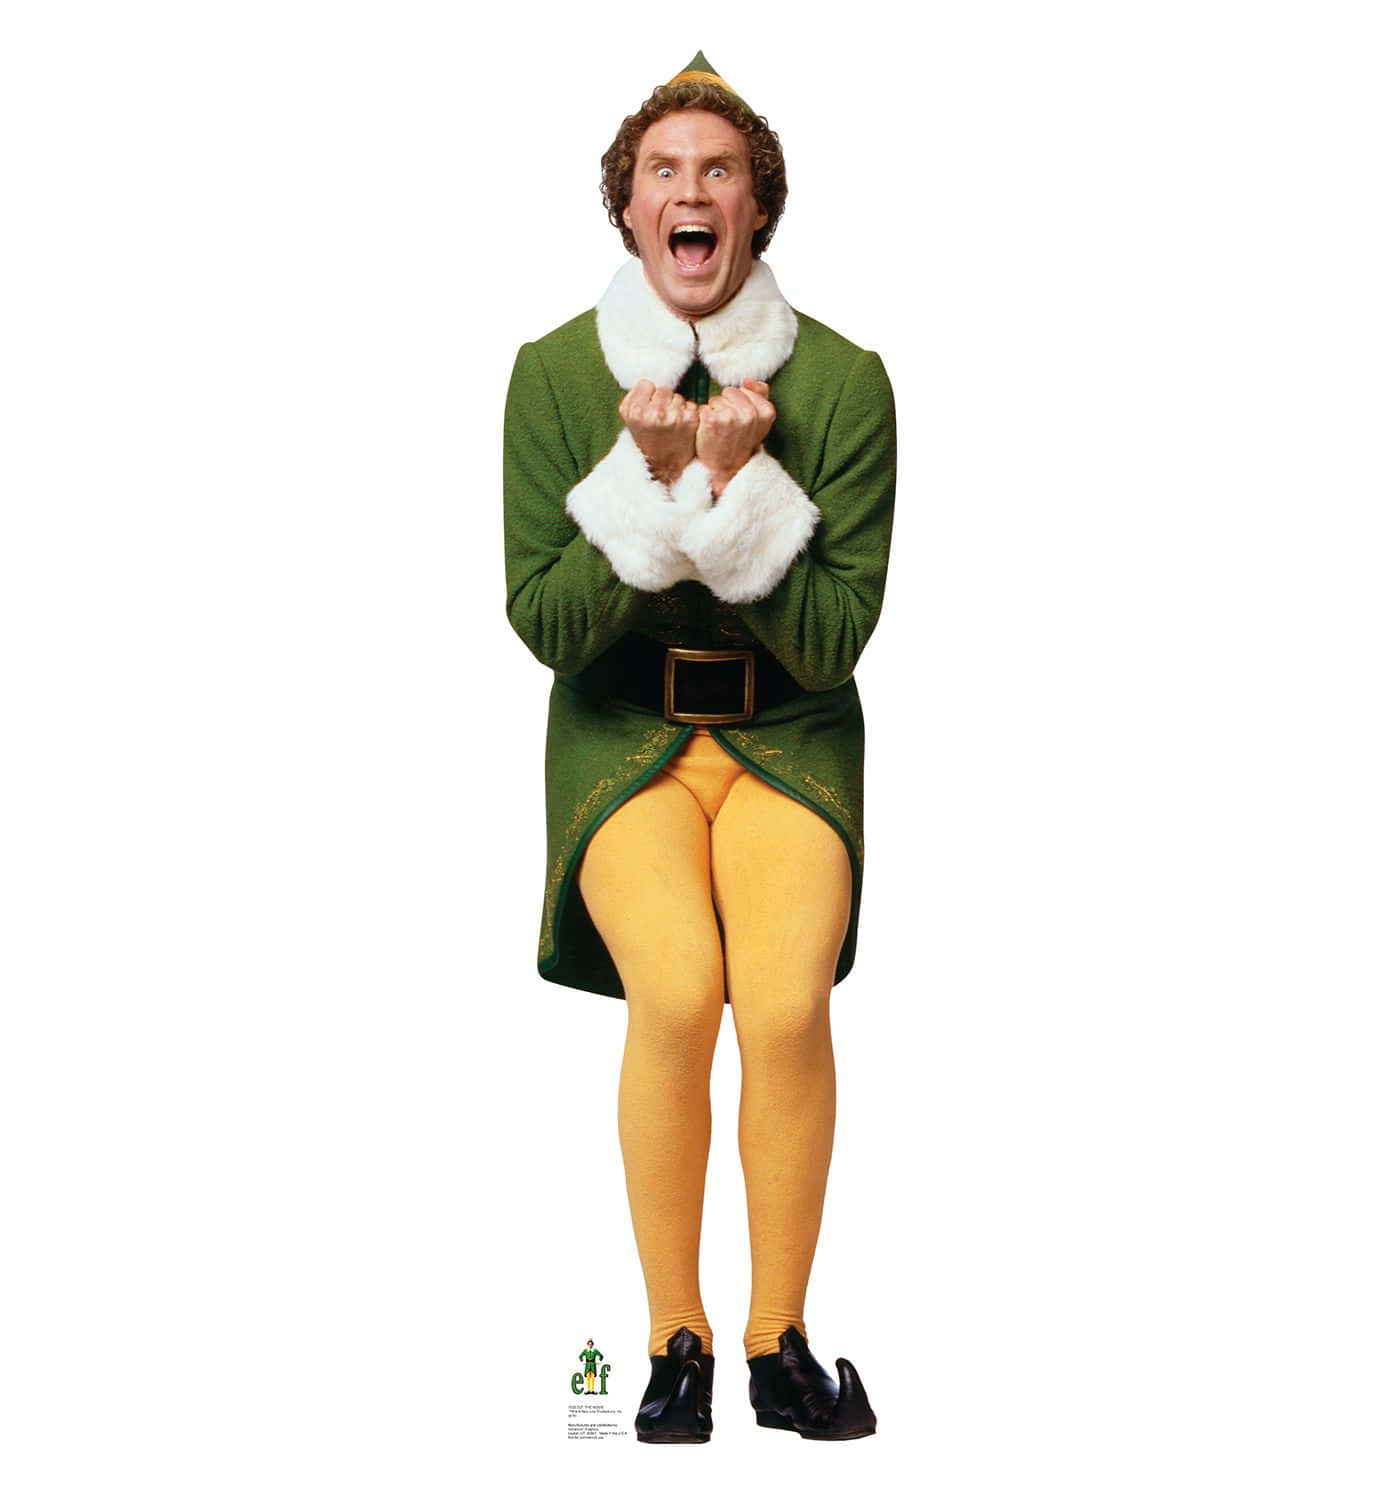 Celebrate Christmas with Buddy The Elf Wallpaper